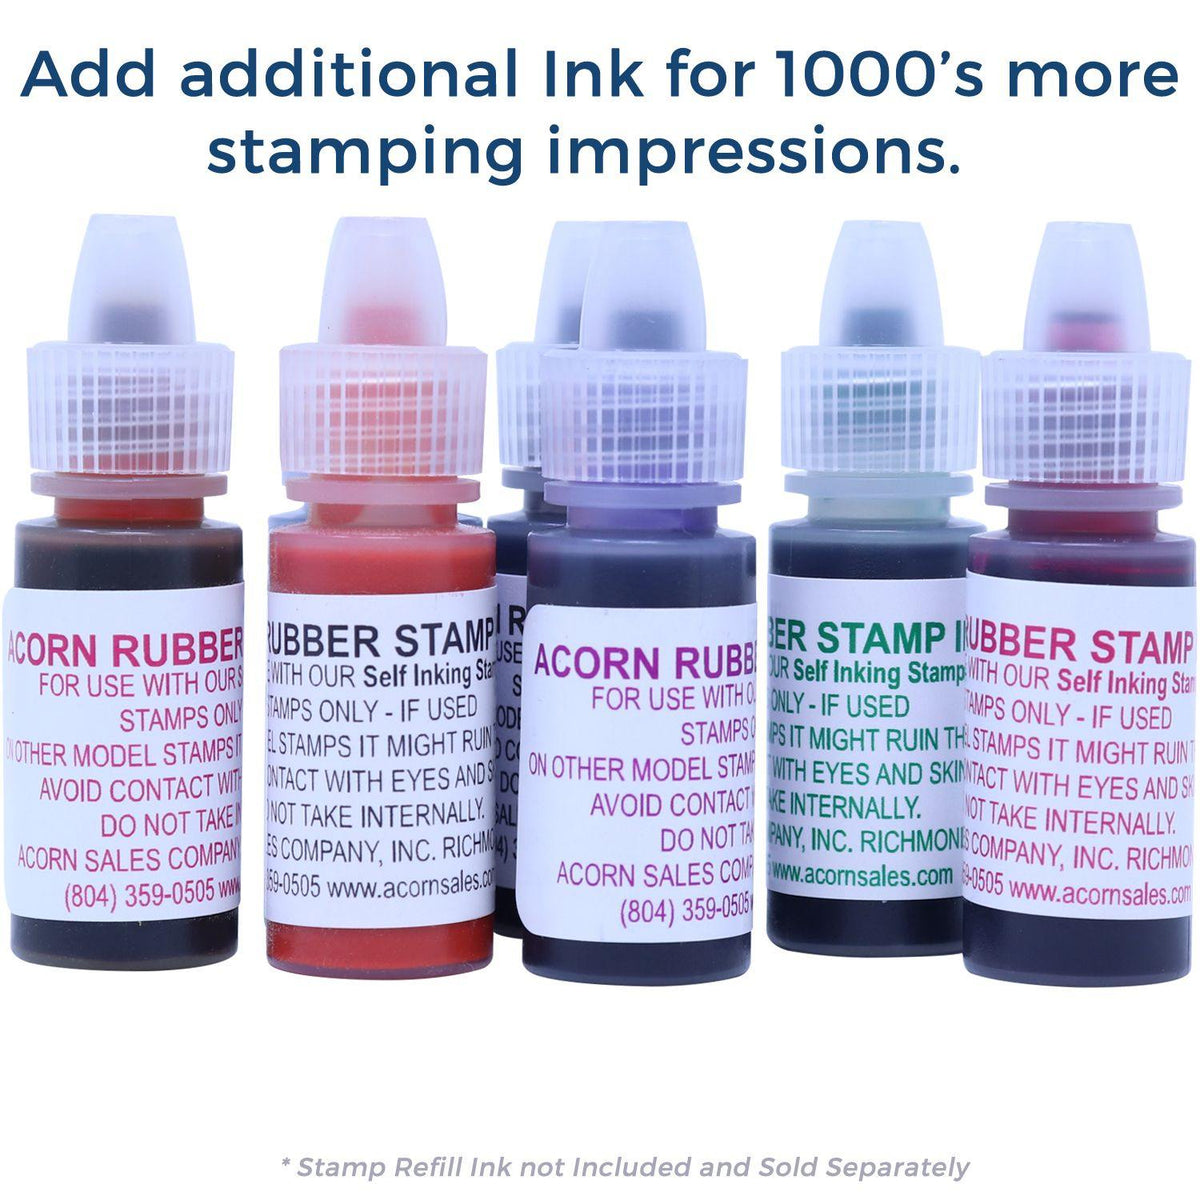 Refill Inks for Large Pre-Inked Void with X Stamp Available